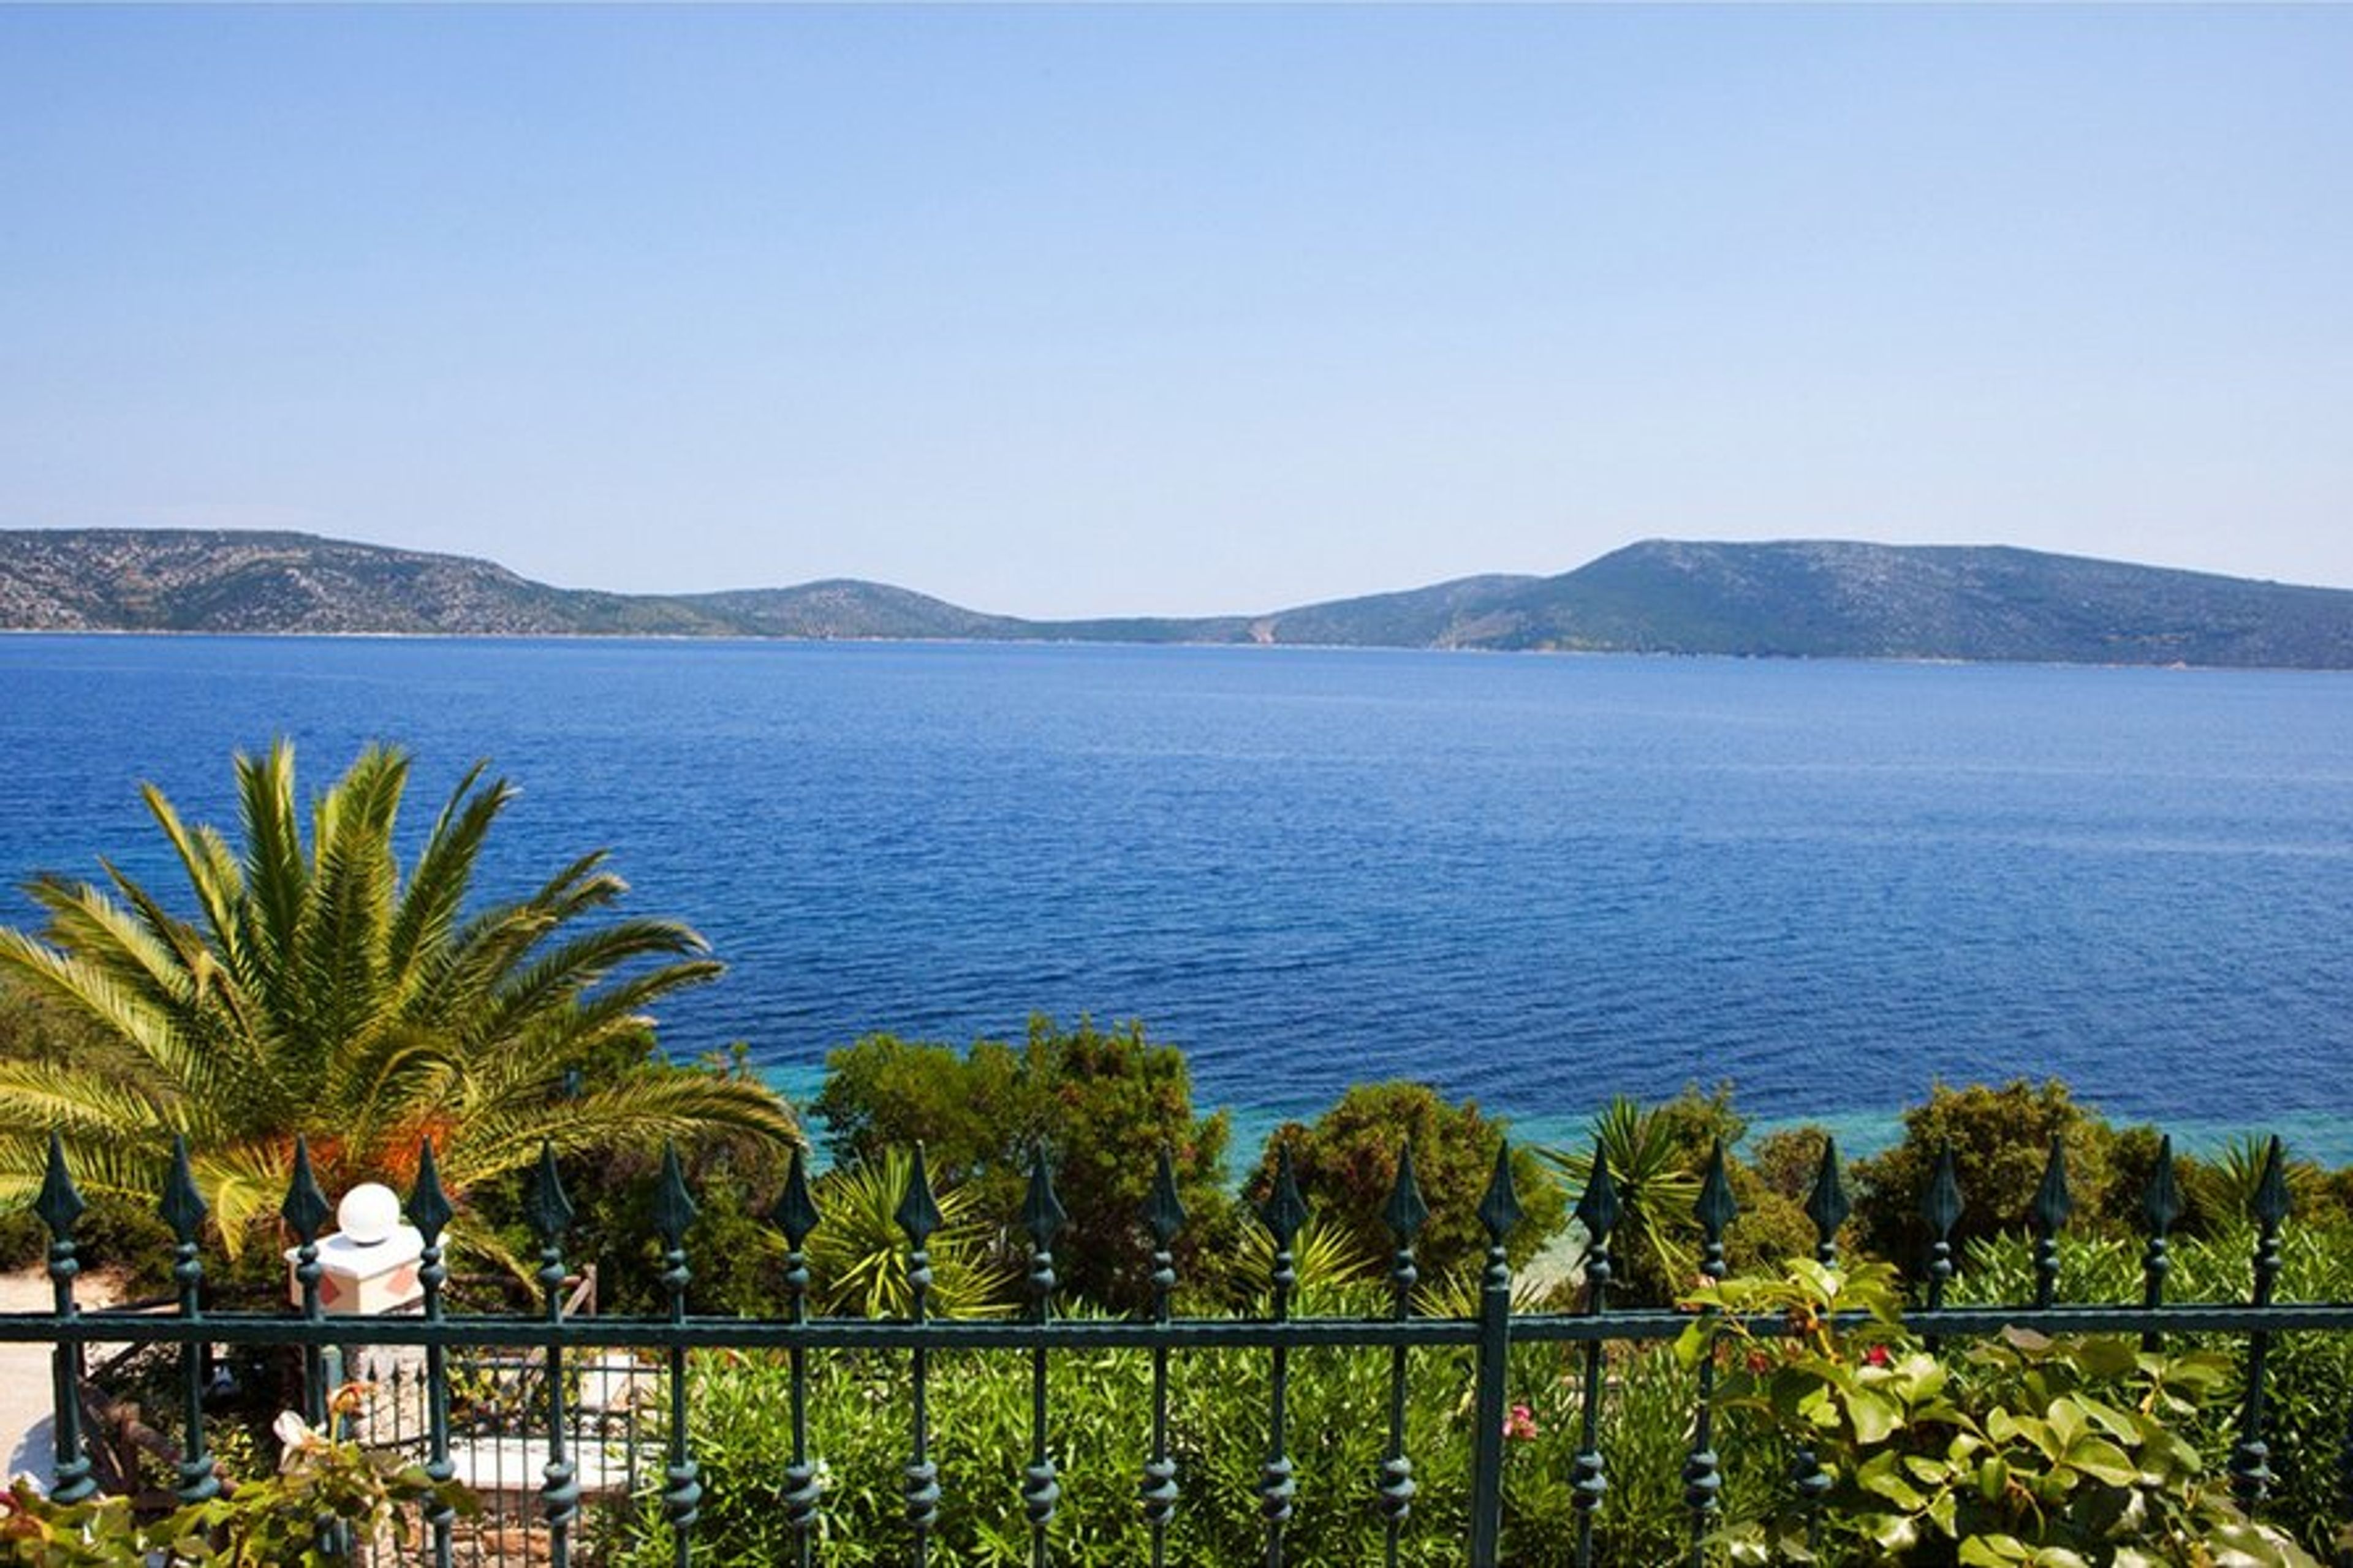 Sea-view from the entrance door of the villa